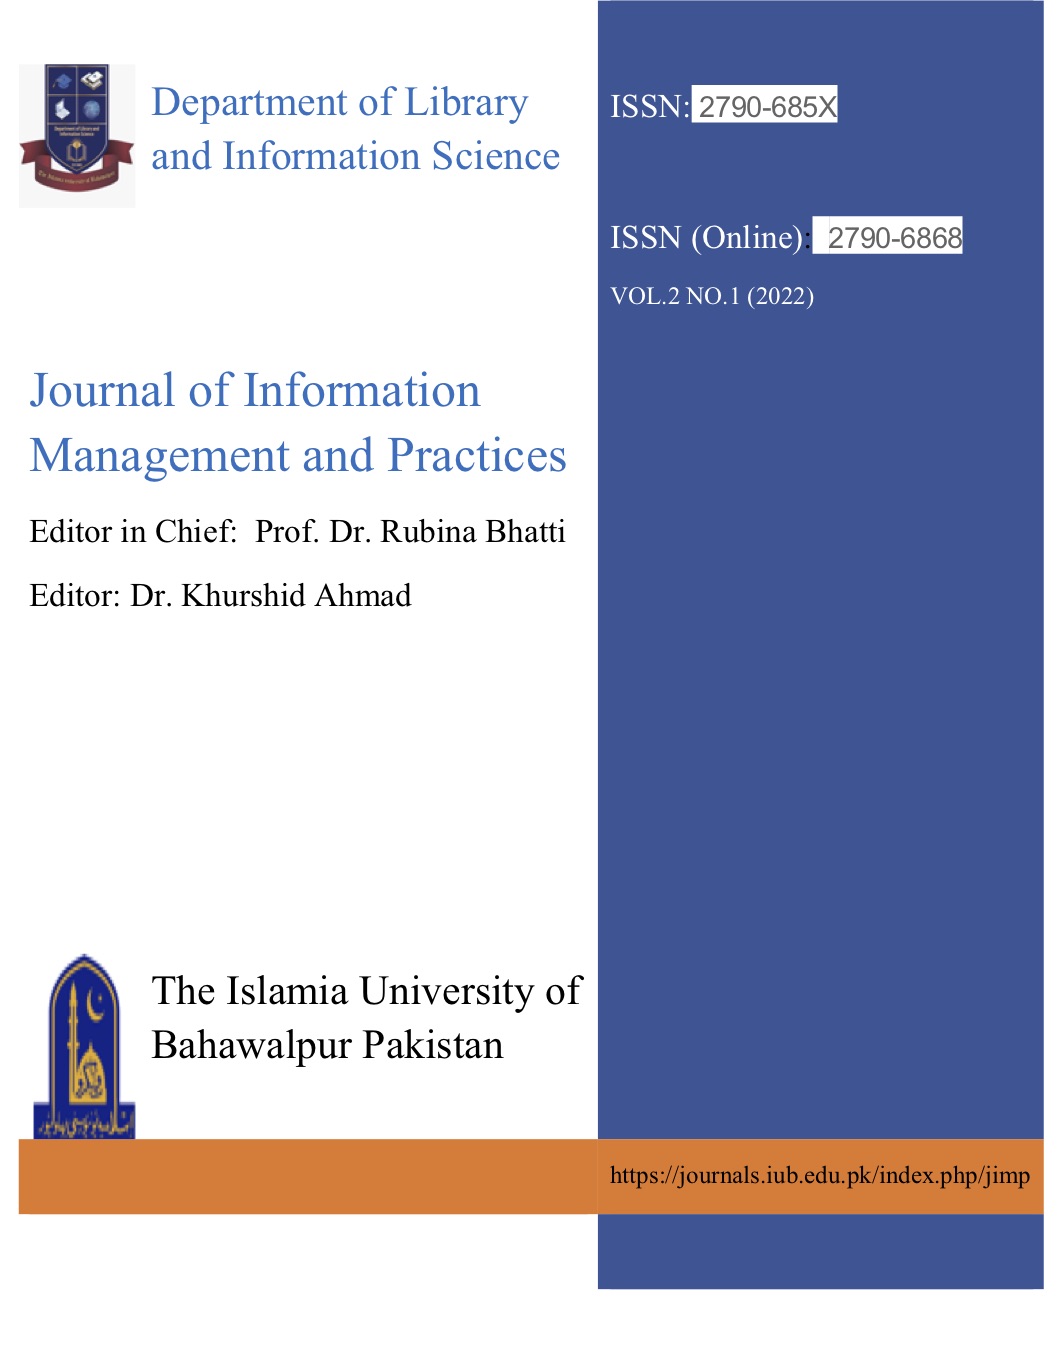 					View Vol. 2 No. 1 (2022): Journal of Information Management and Practices  
				